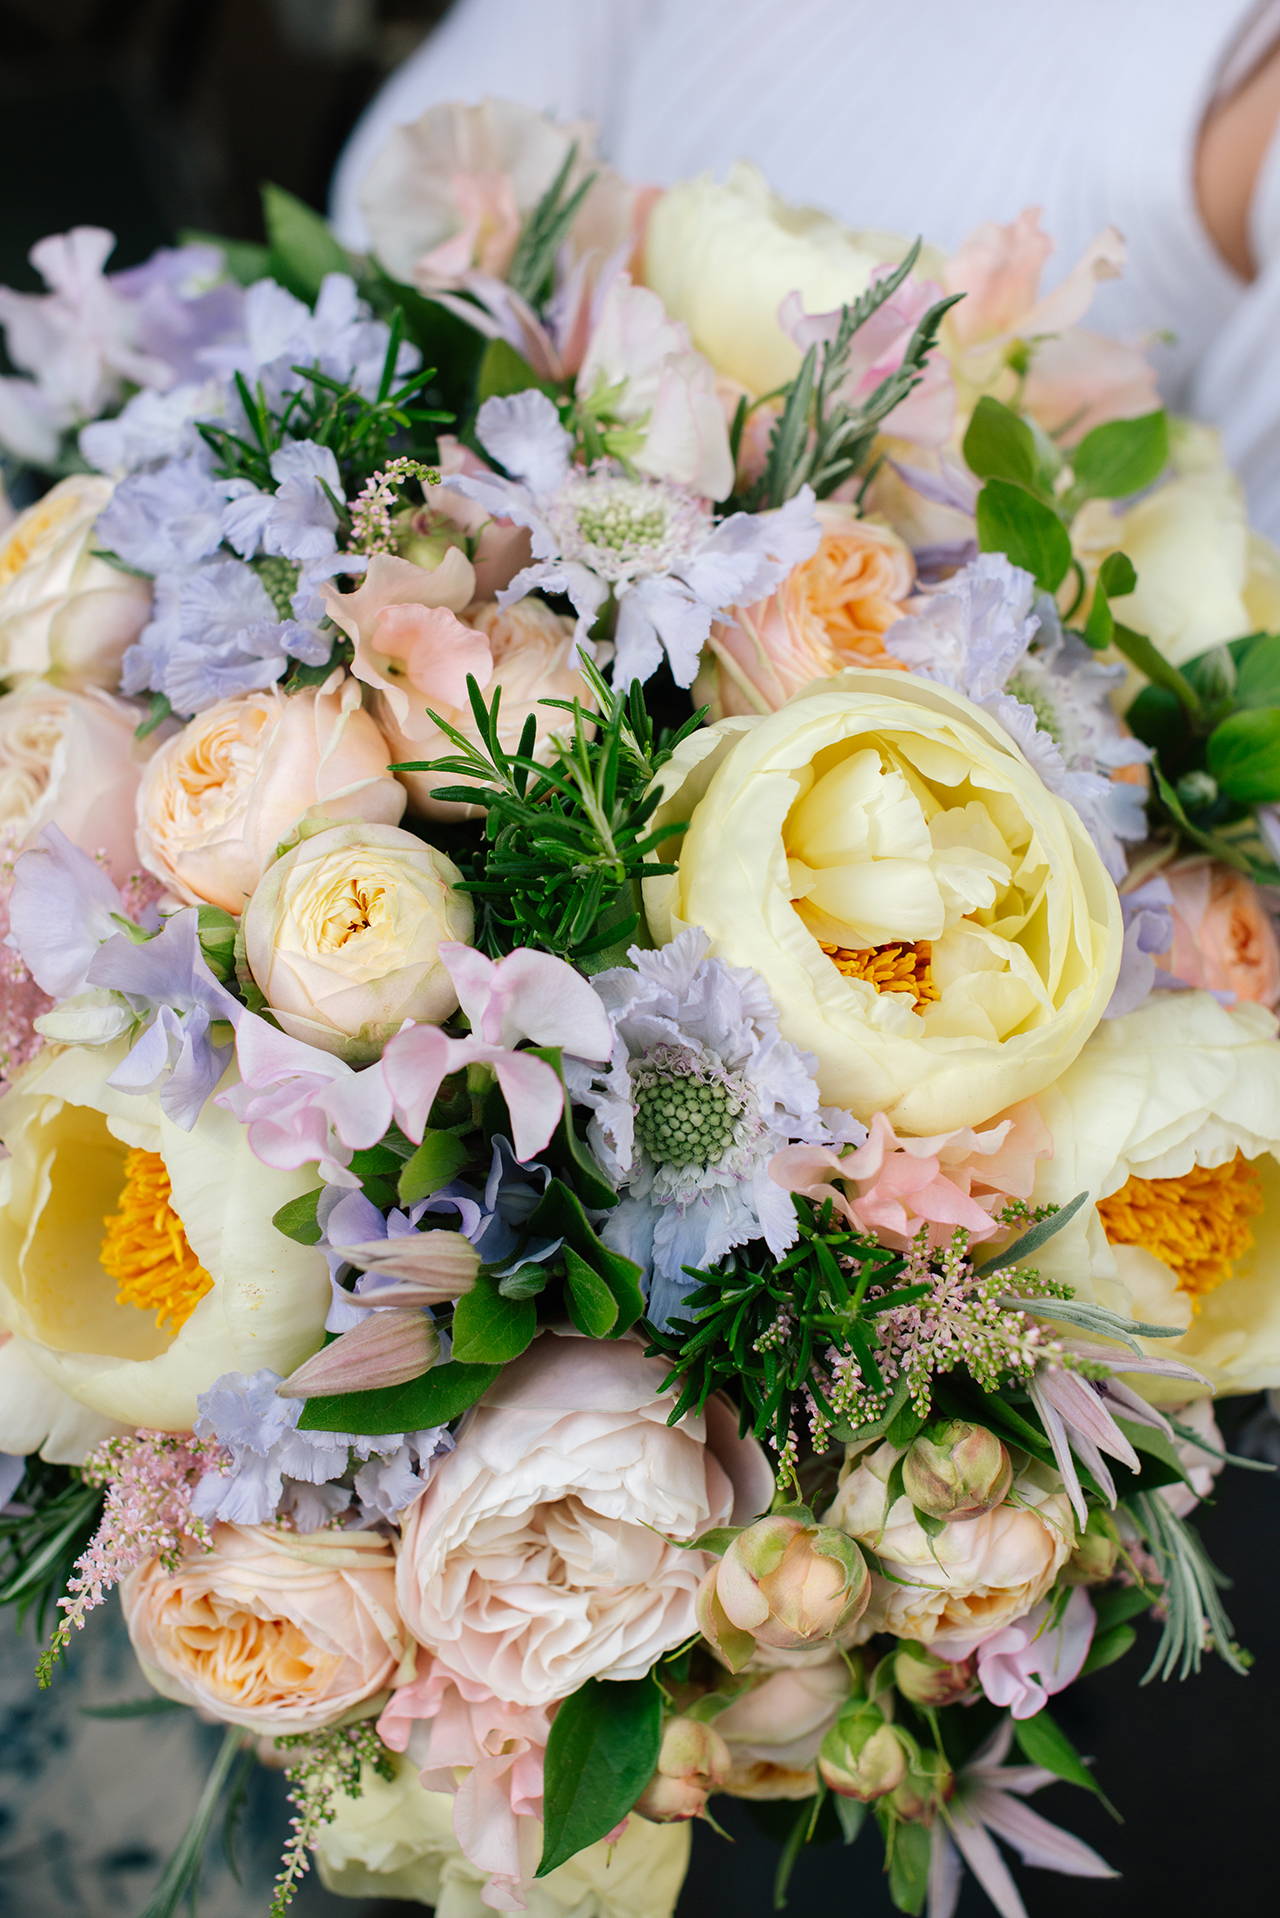 Wild at Heart Limited Edition Platinum Jubilee Bouquet, featuring lemon yellow peonies.